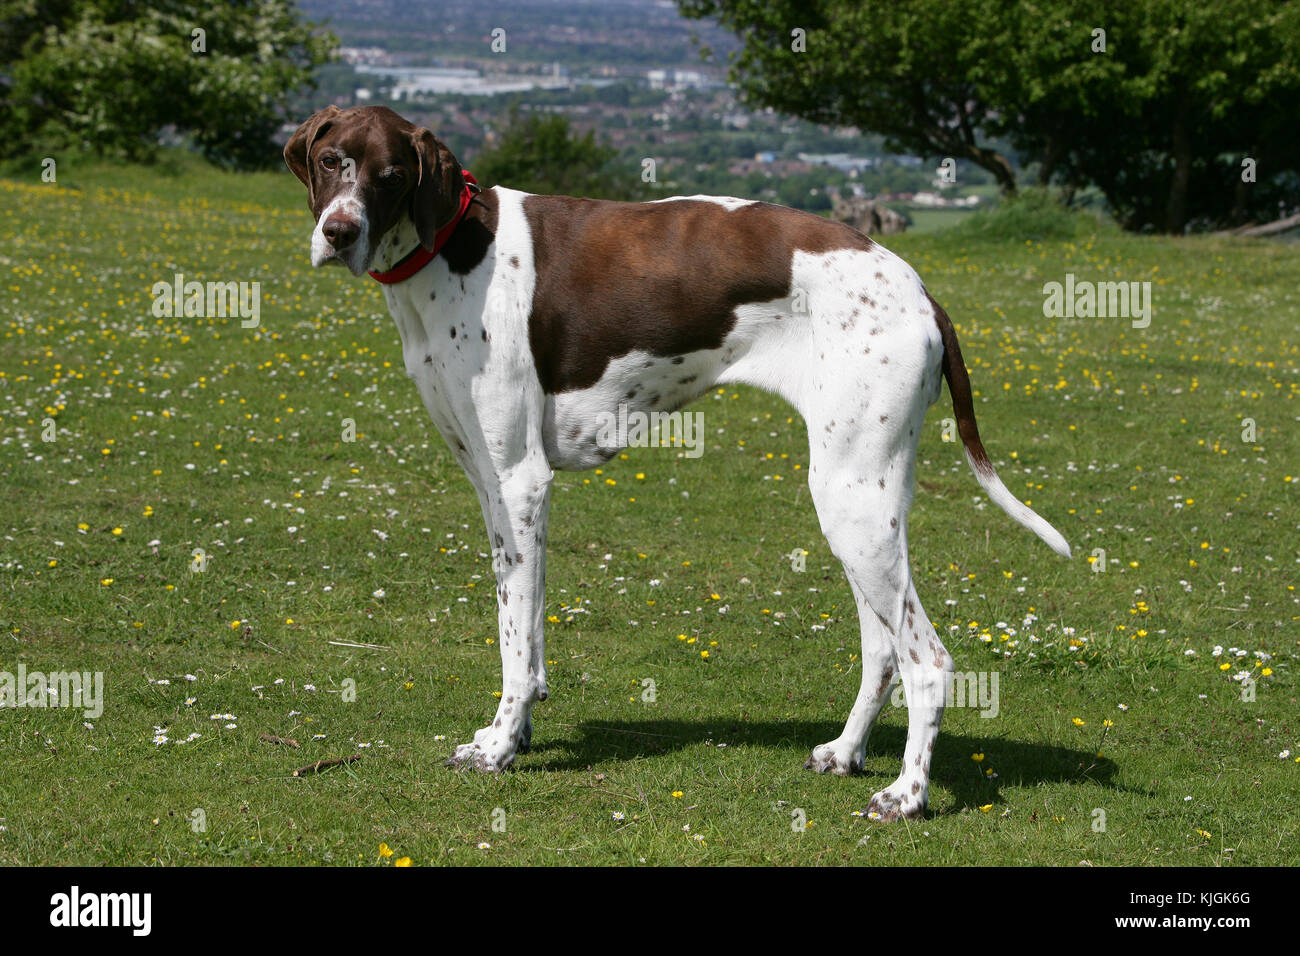 Pointer - English English Pointer Pointer liver and white dog standing looking alert at the camera with head cocked in a meadow of flowers Stock Photo